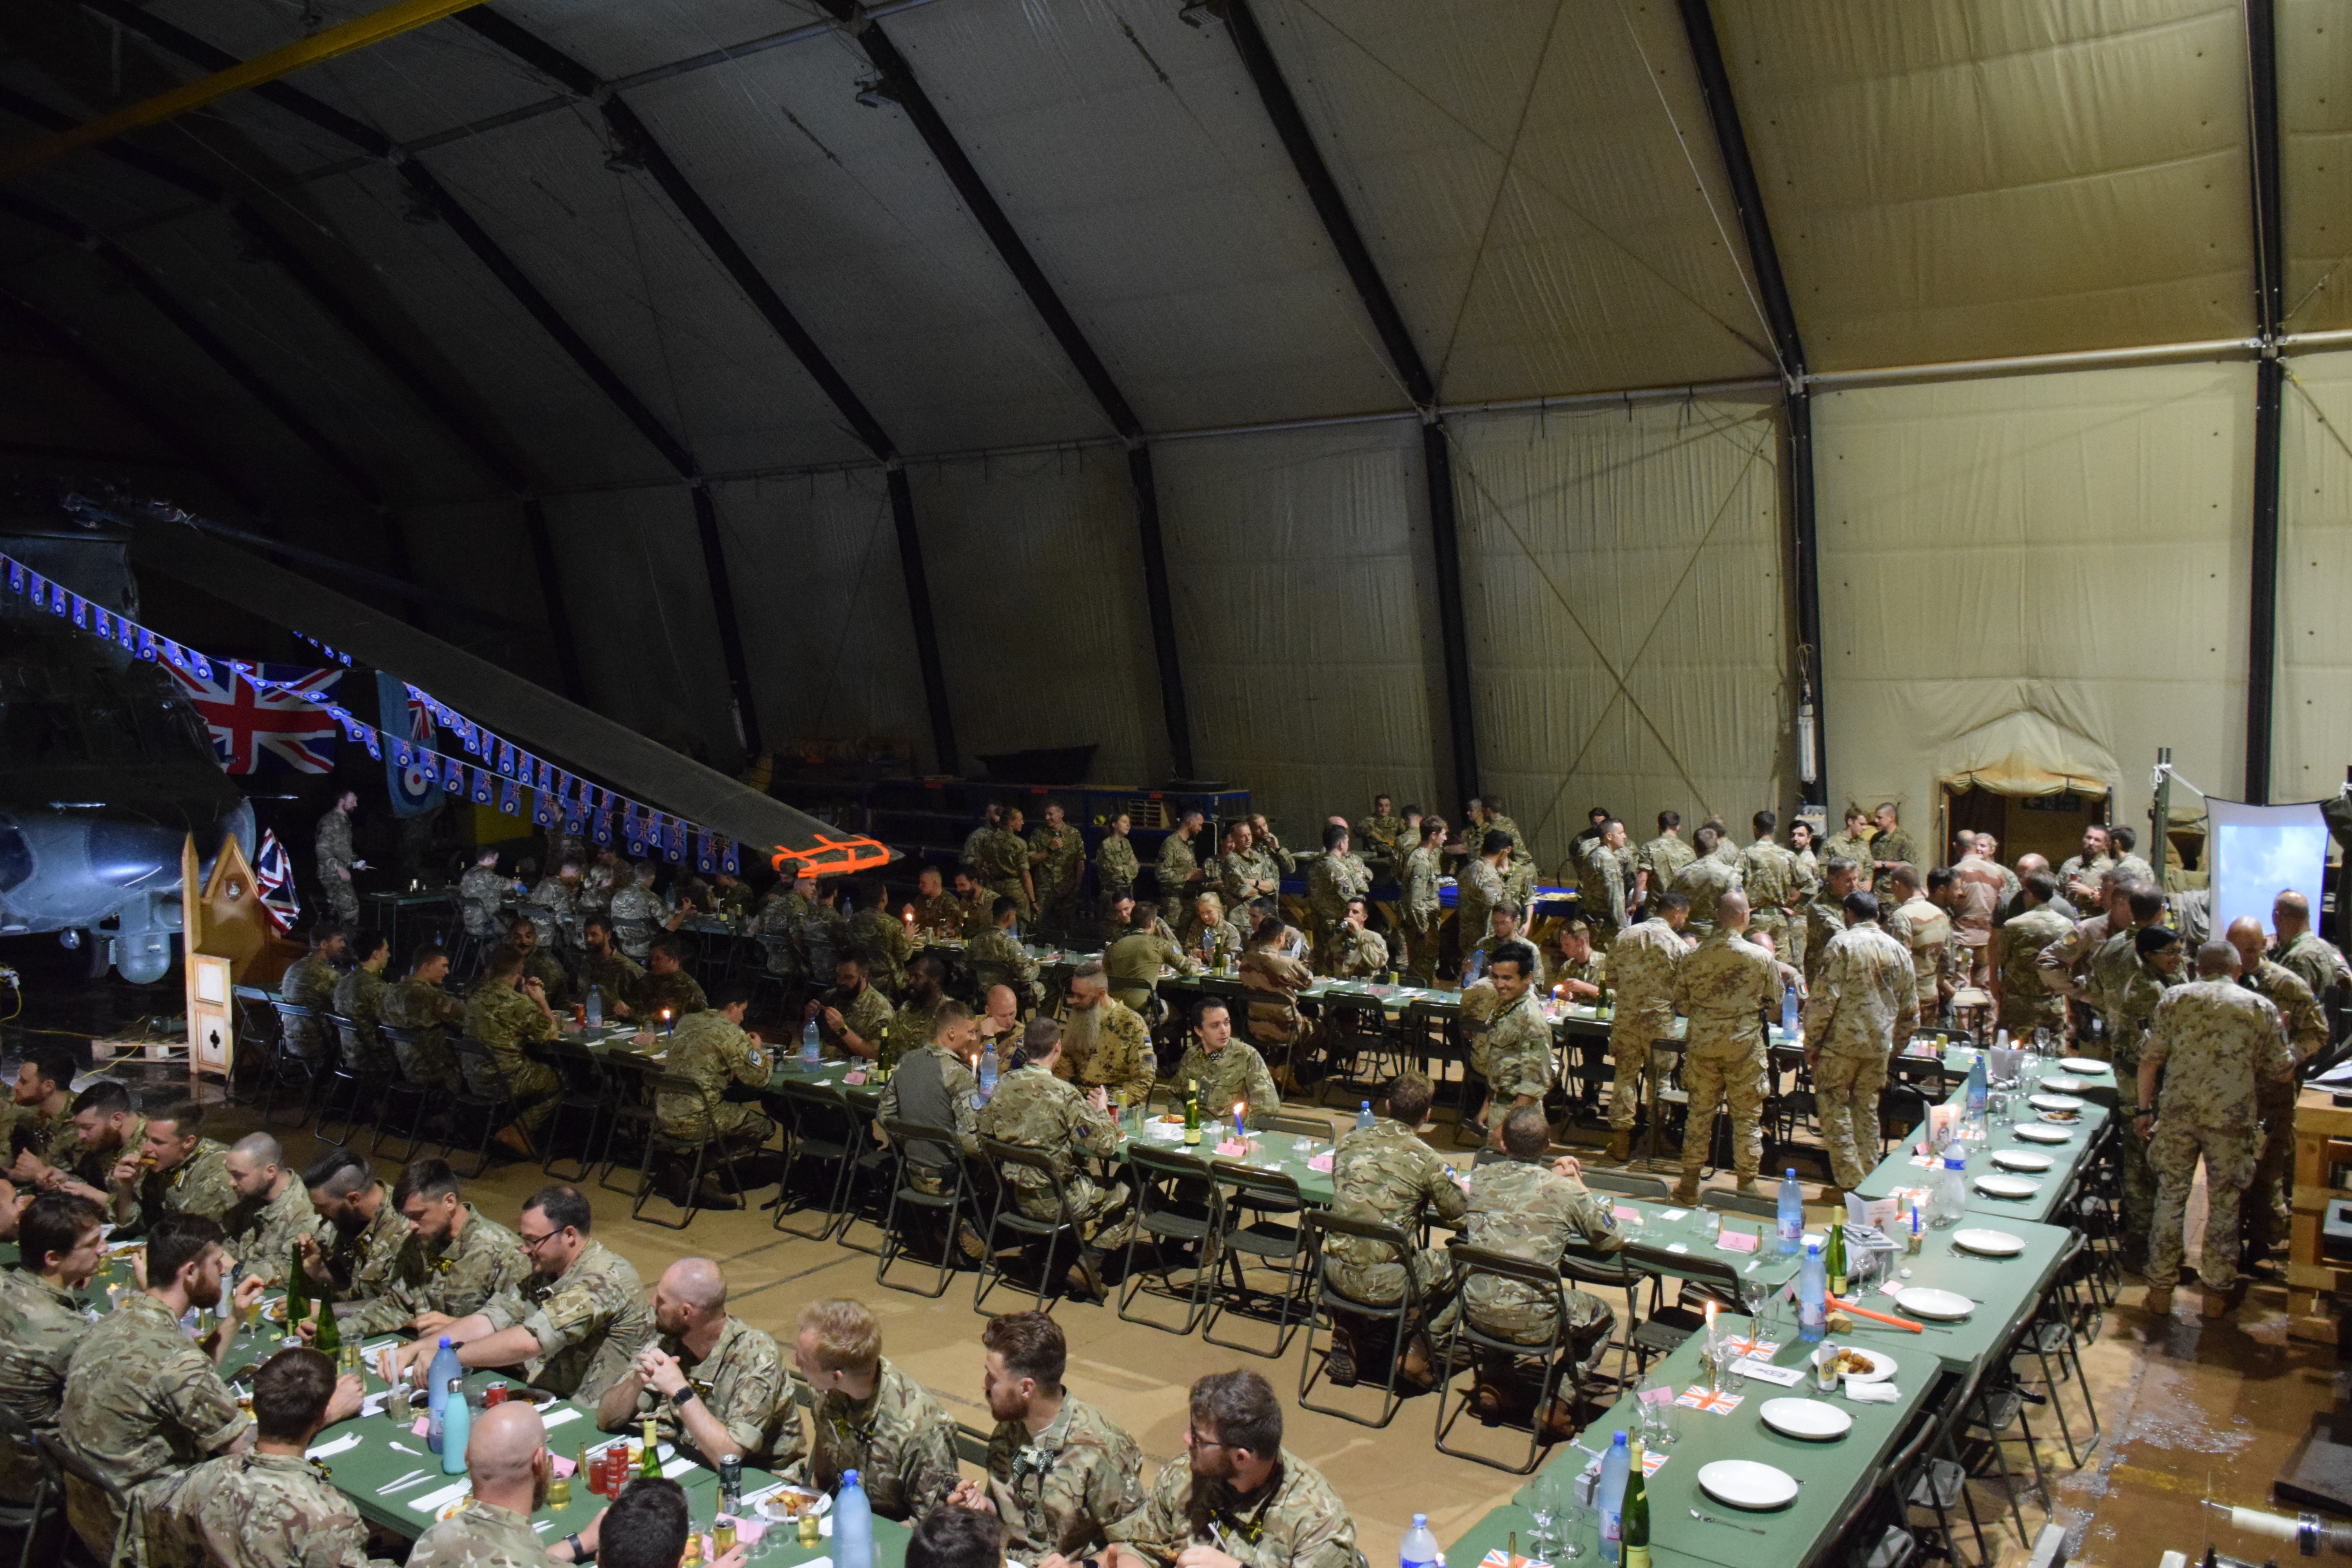 Personnel sit inside a hangar to eat. 